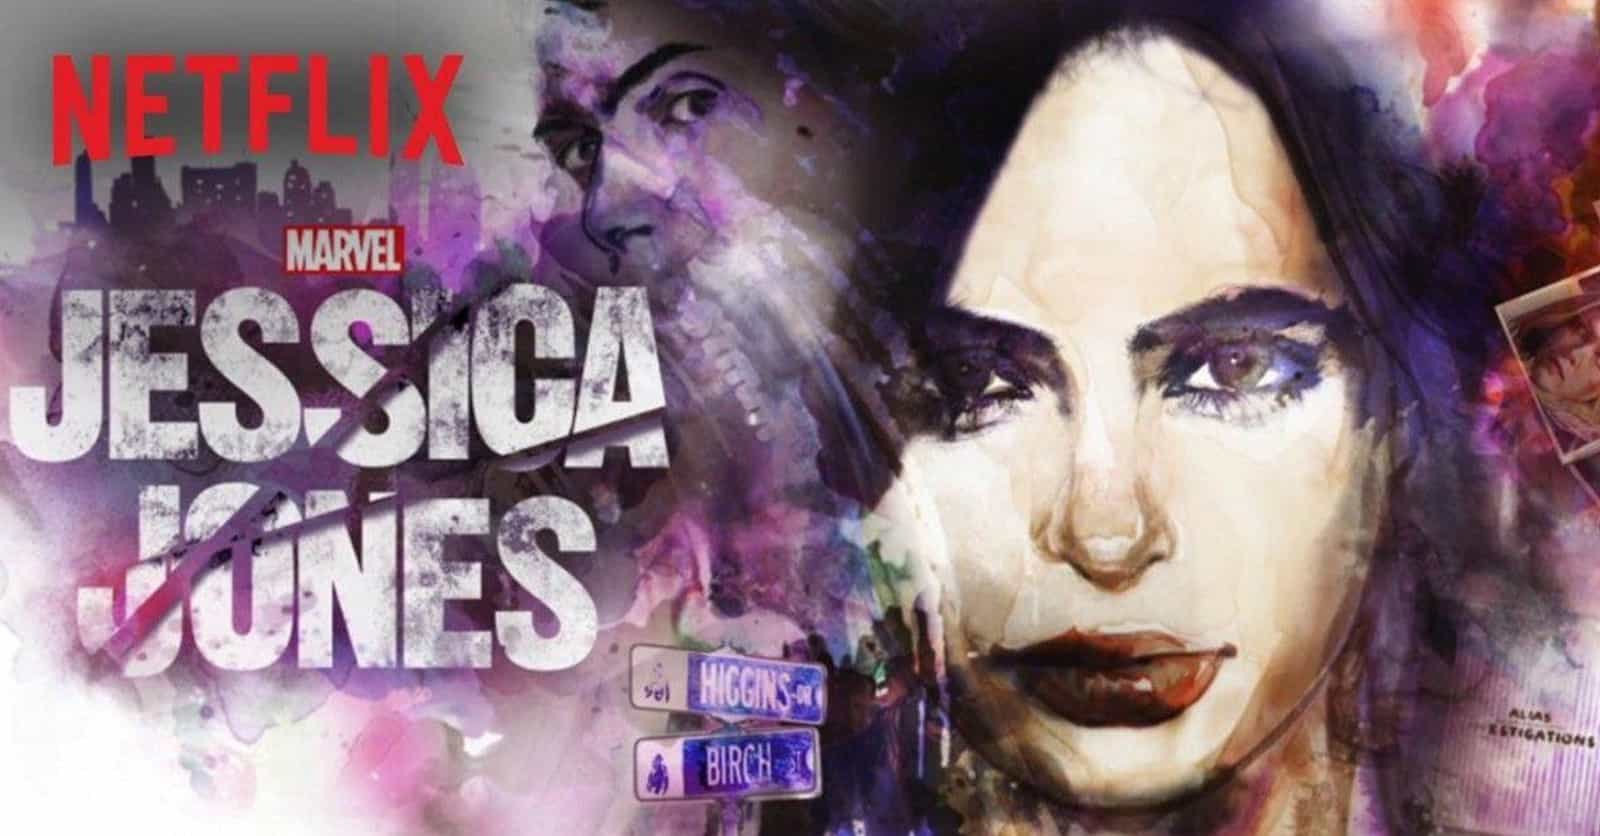 33 Easter Eggs You Never Would Have Noticed in Jessica Jones